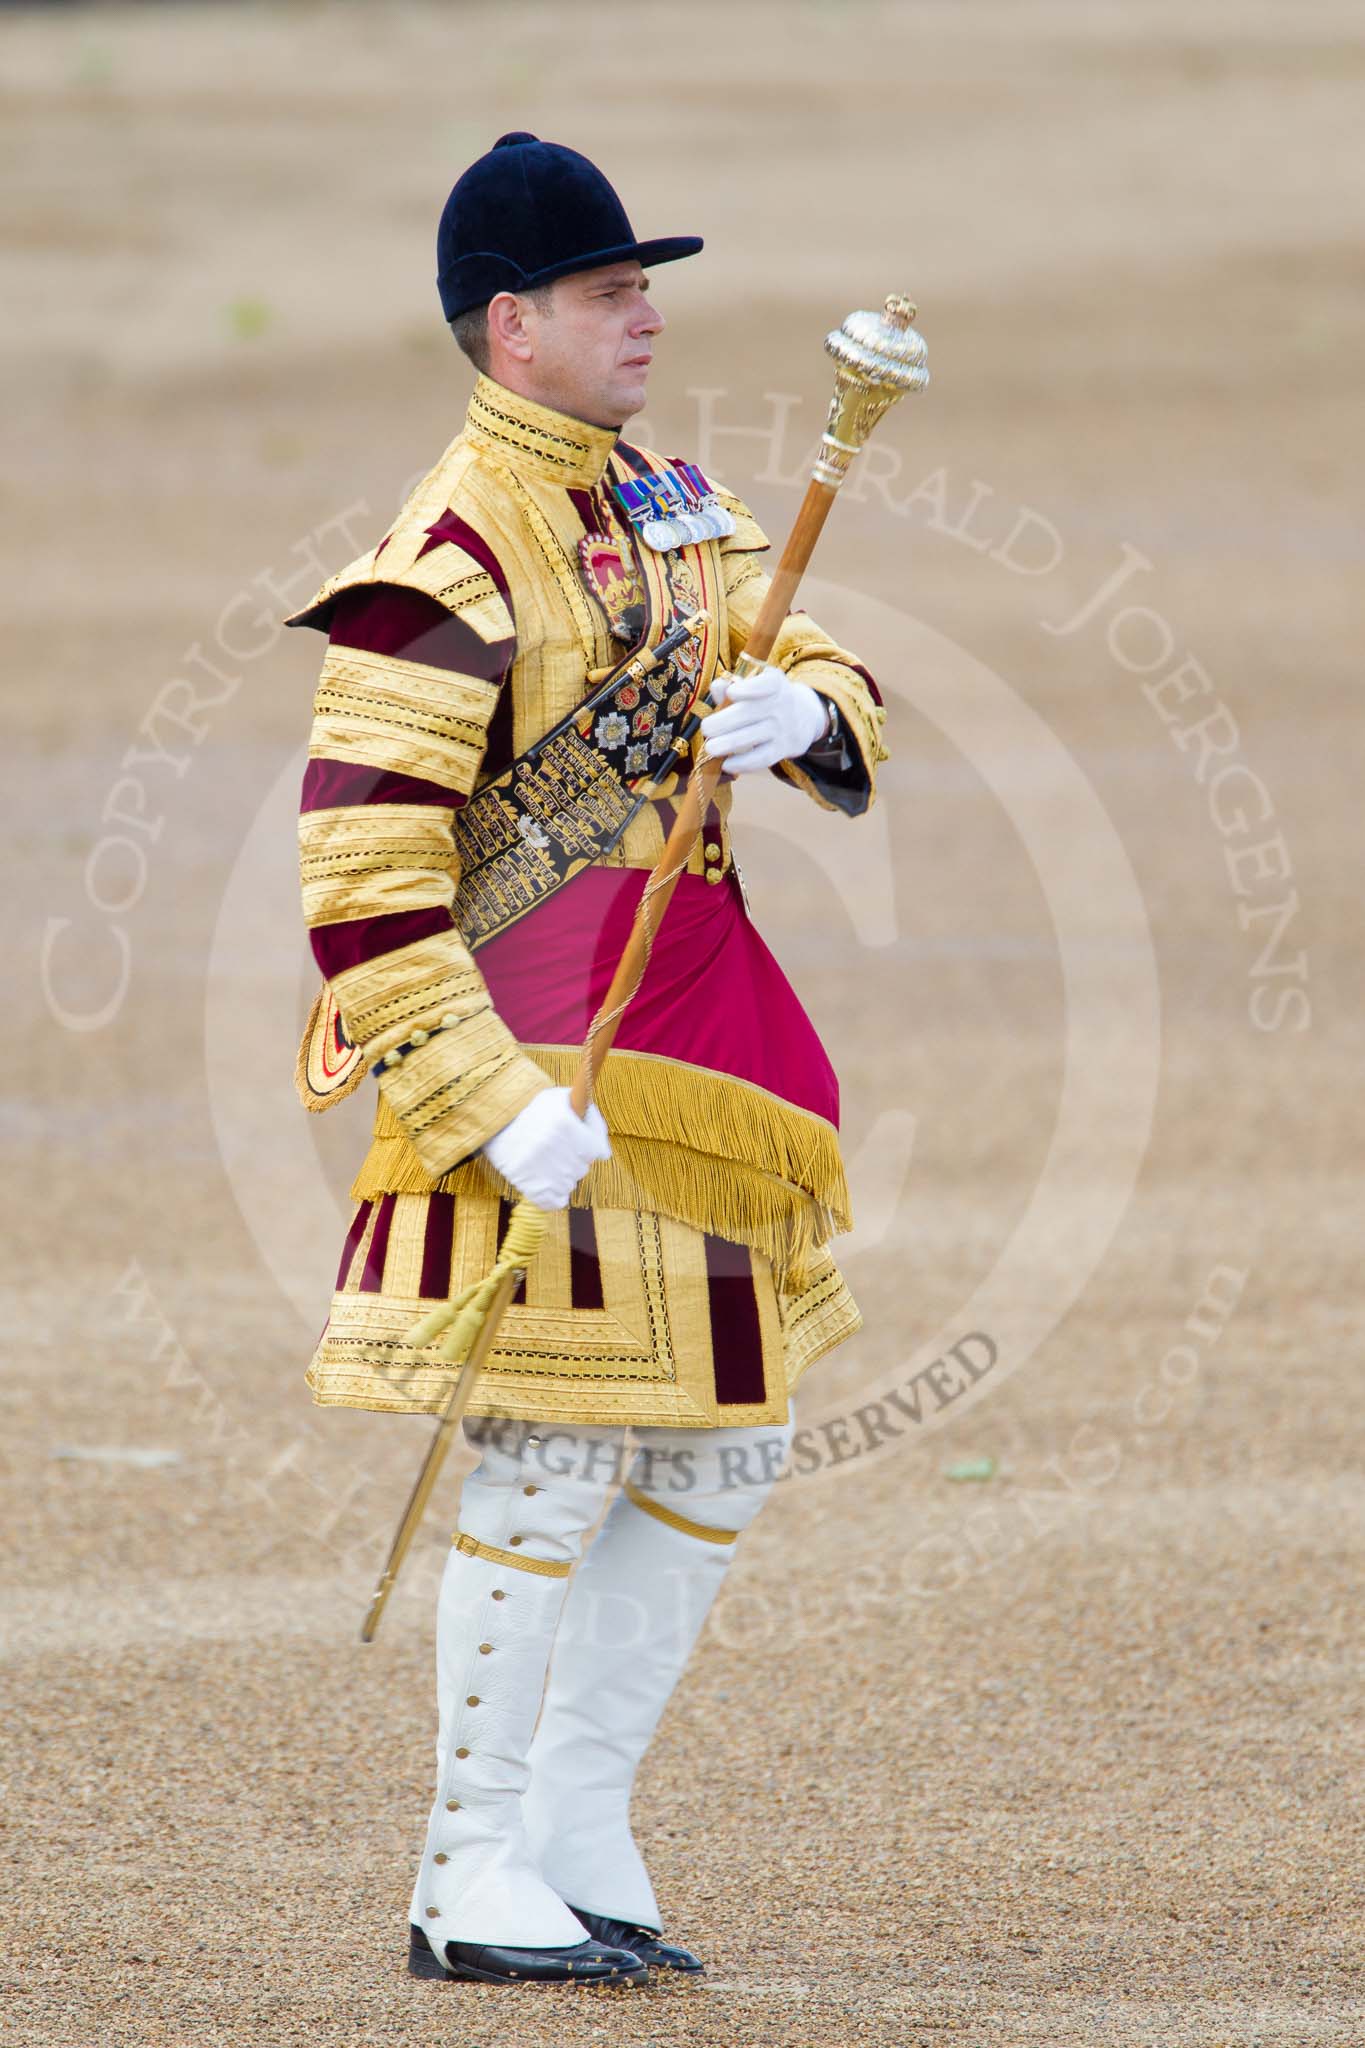 Trooping the Colour 2012: Senior Drum Major M Betts, Grenadier Guards..
Horse Guards Parade, Westminster,
London SW1,

United Kingdom,
on 16 June 2012 at 10:15, image #28